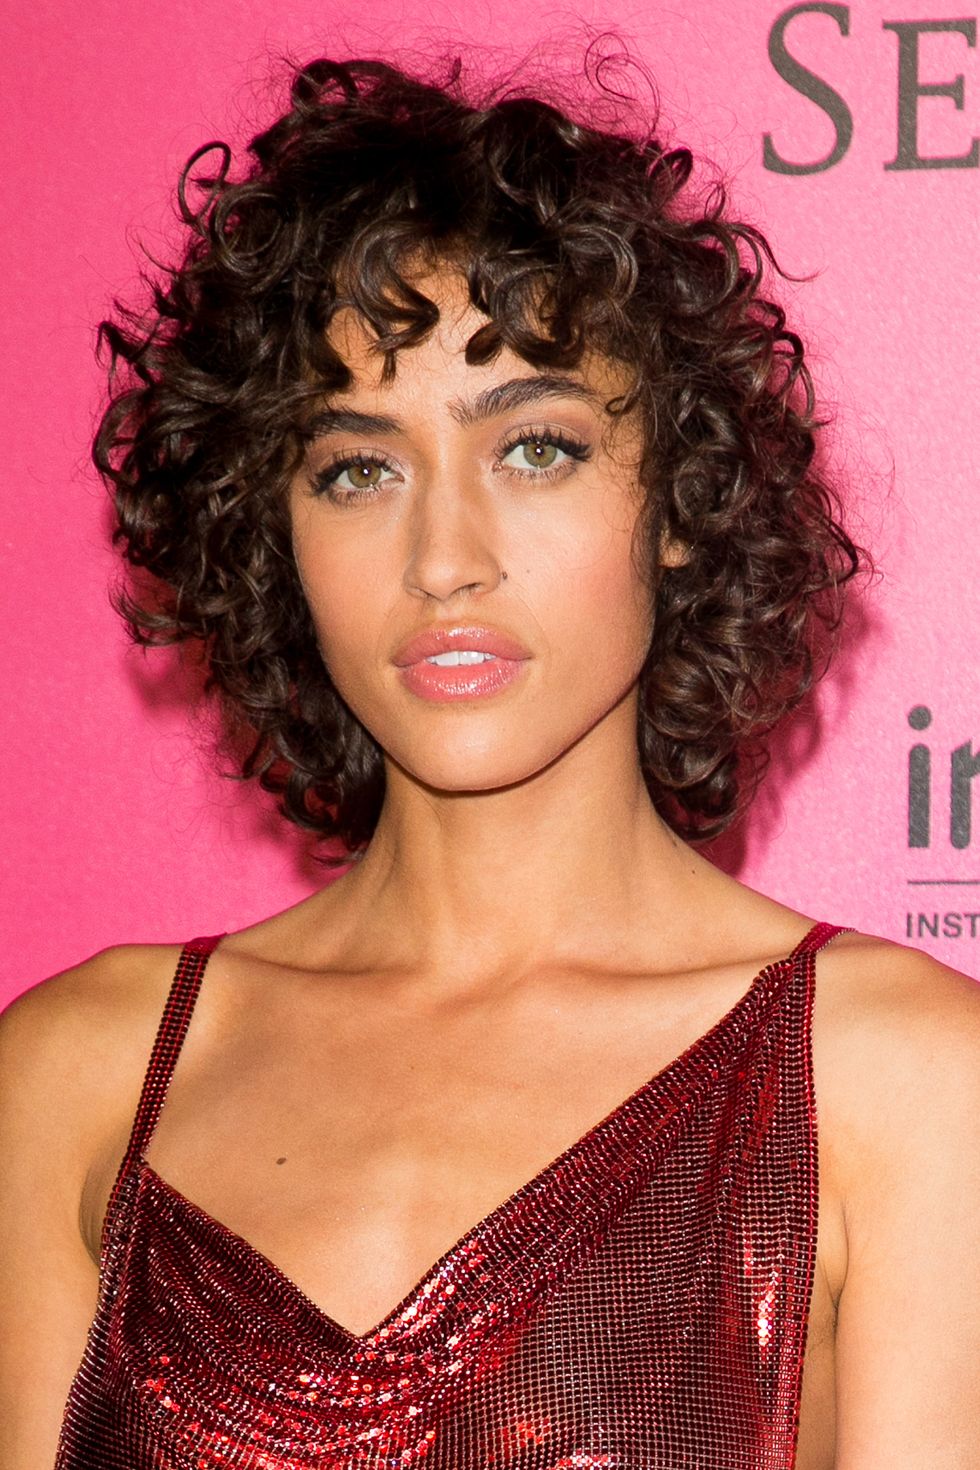 Look Absolutely Different by Trying Out The Curly Short Hairstyles Women  2018, by shortcurlyhaircuts